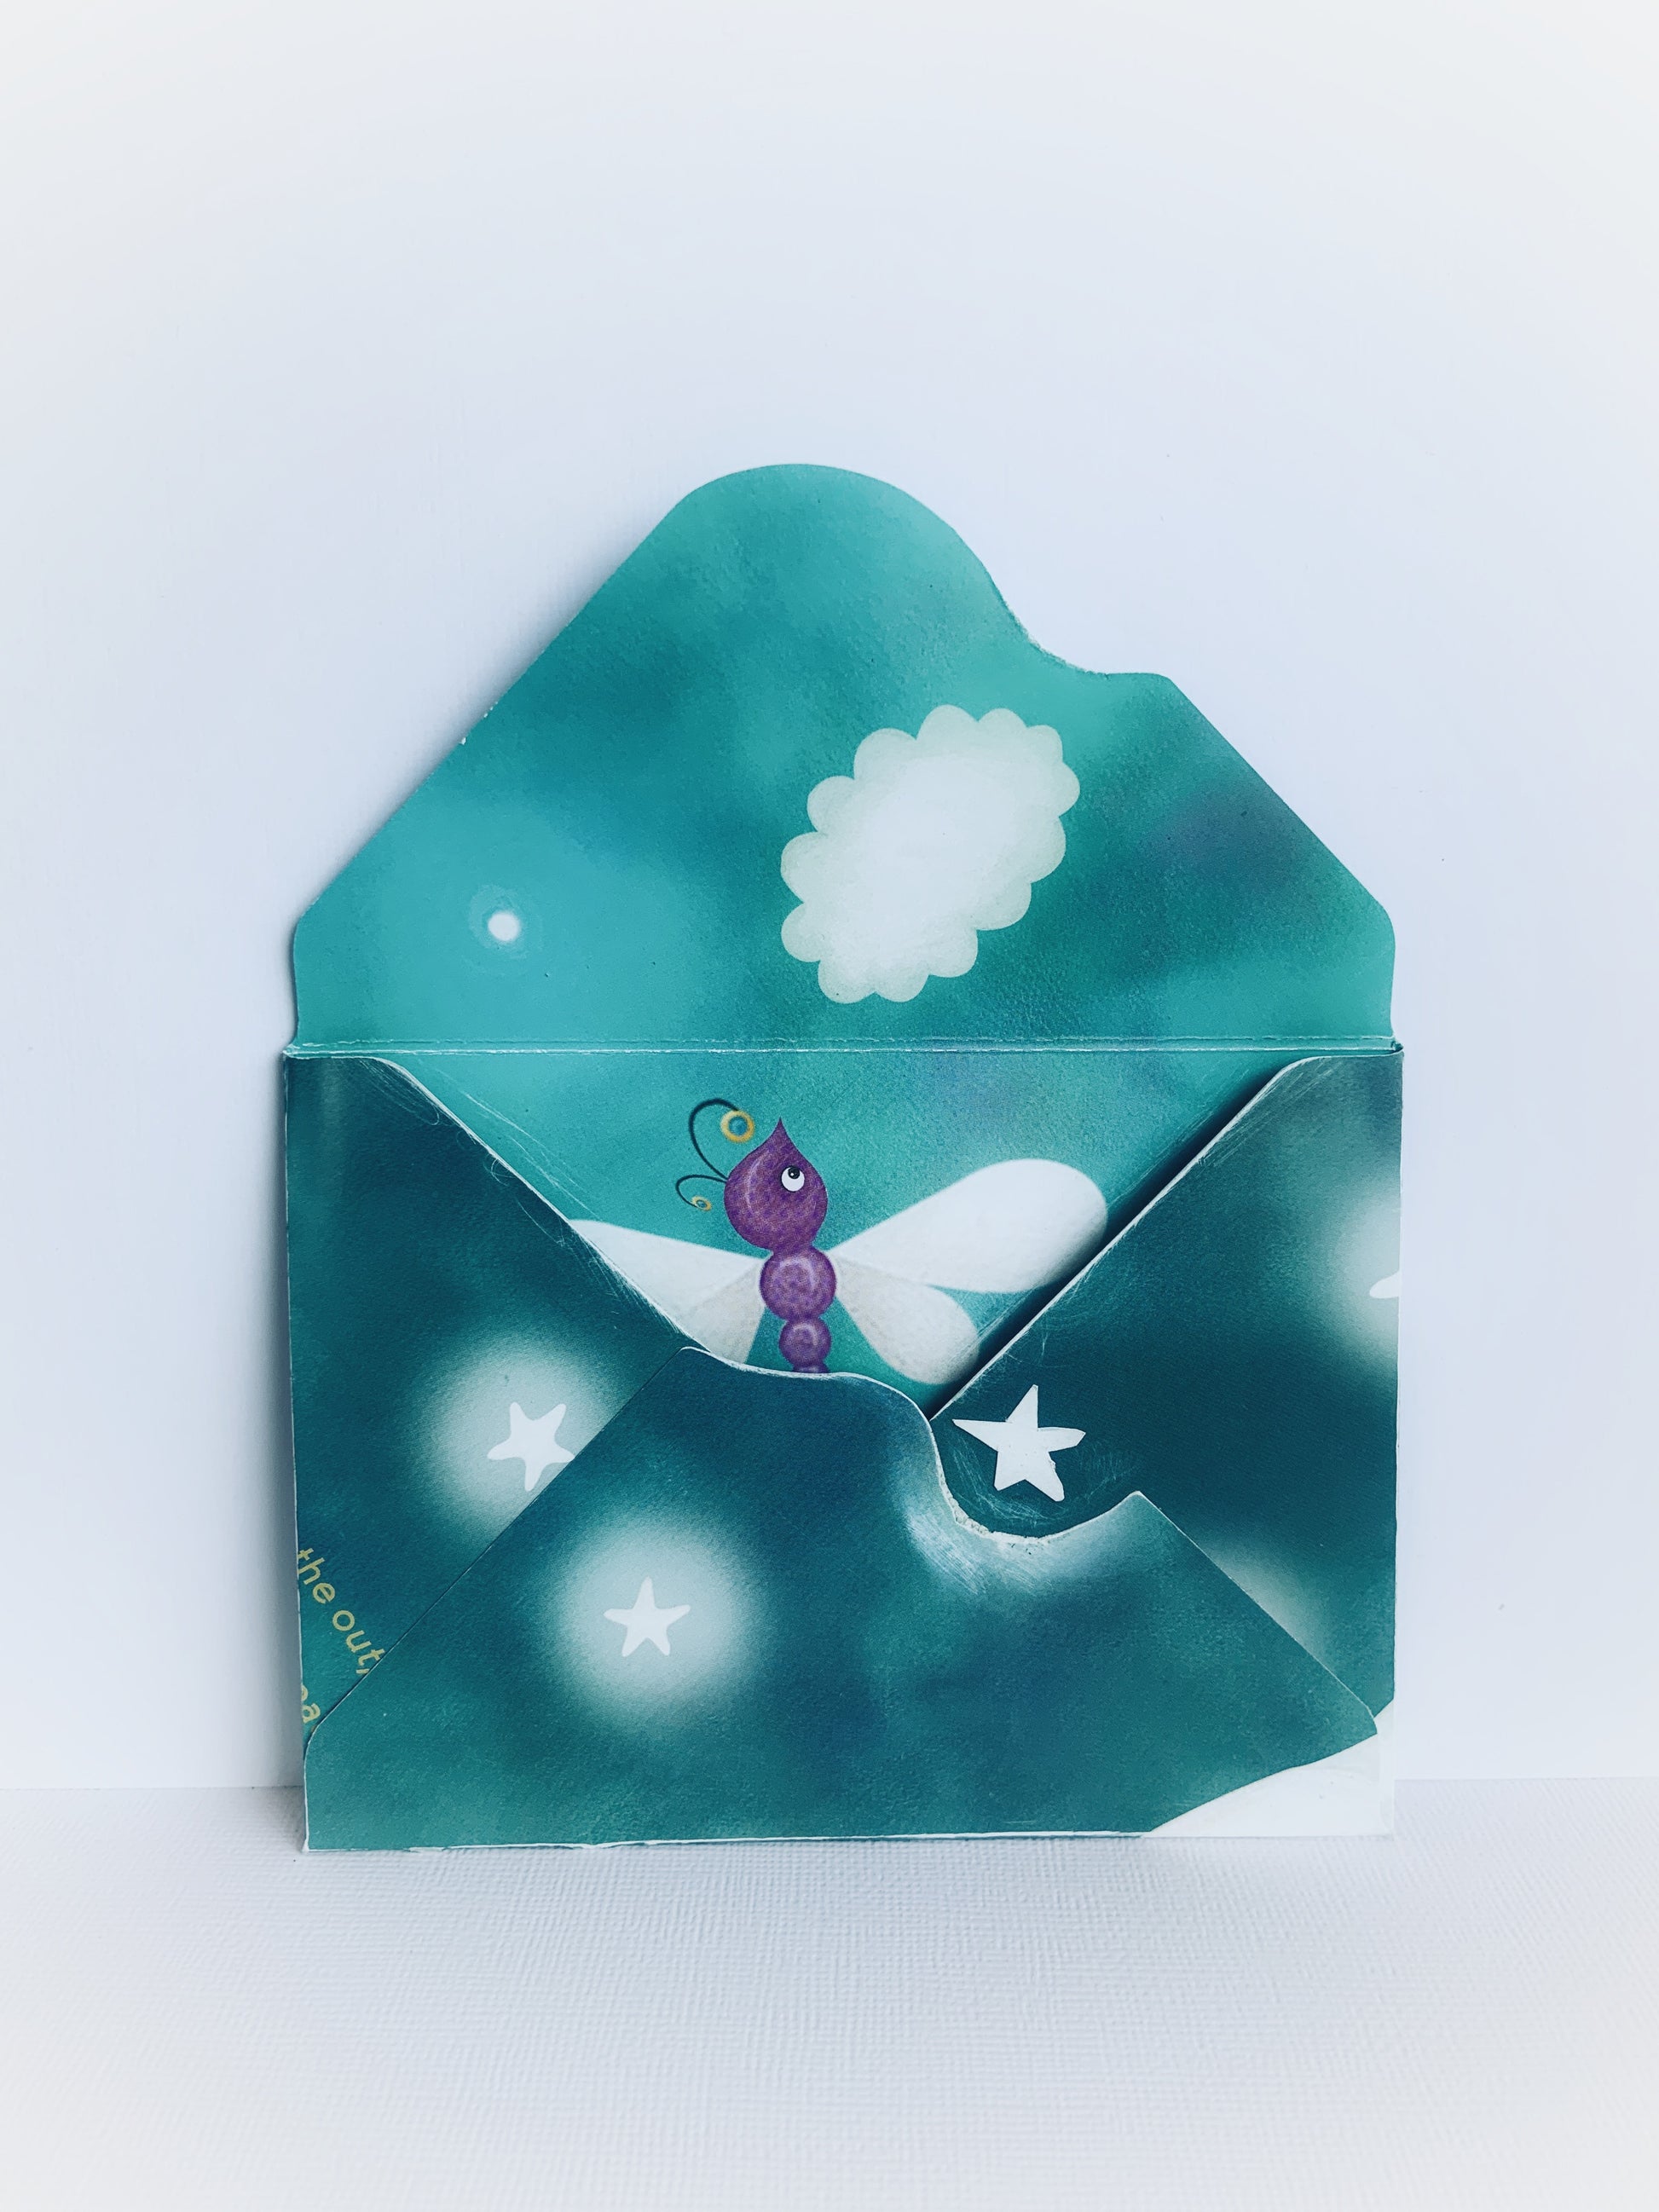 The back of a handmade children's envelope with a purple dragonfly, a cloud and stars that shows the detail on the inside and on the flap.